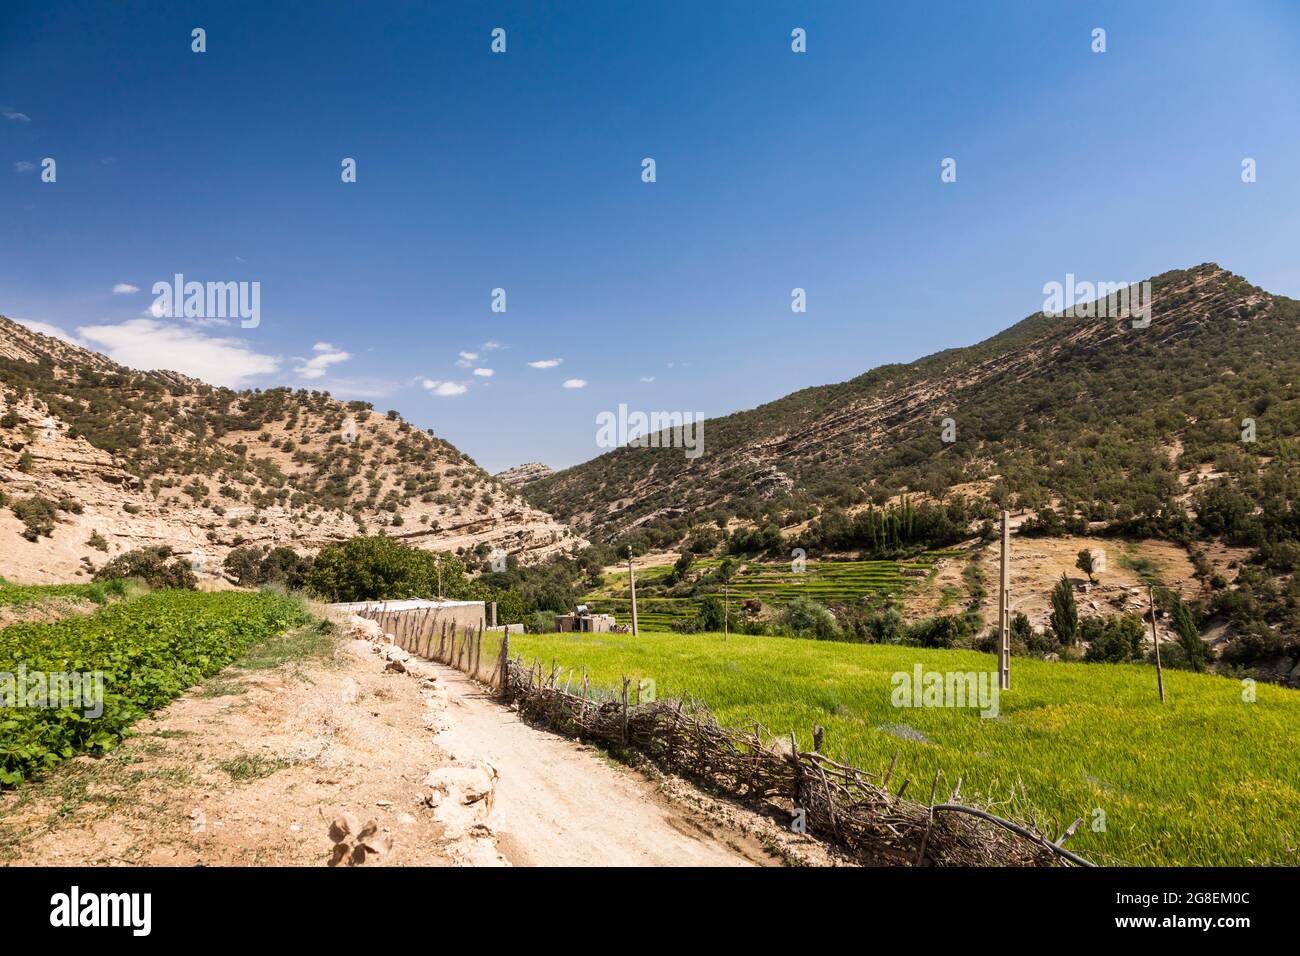 Presumed ancient 'Susian Gate', Alexander the great passed to Persia, Zagros mountains, Abadeh, Iran, Persia, Western Asia, Asia Stock Photo